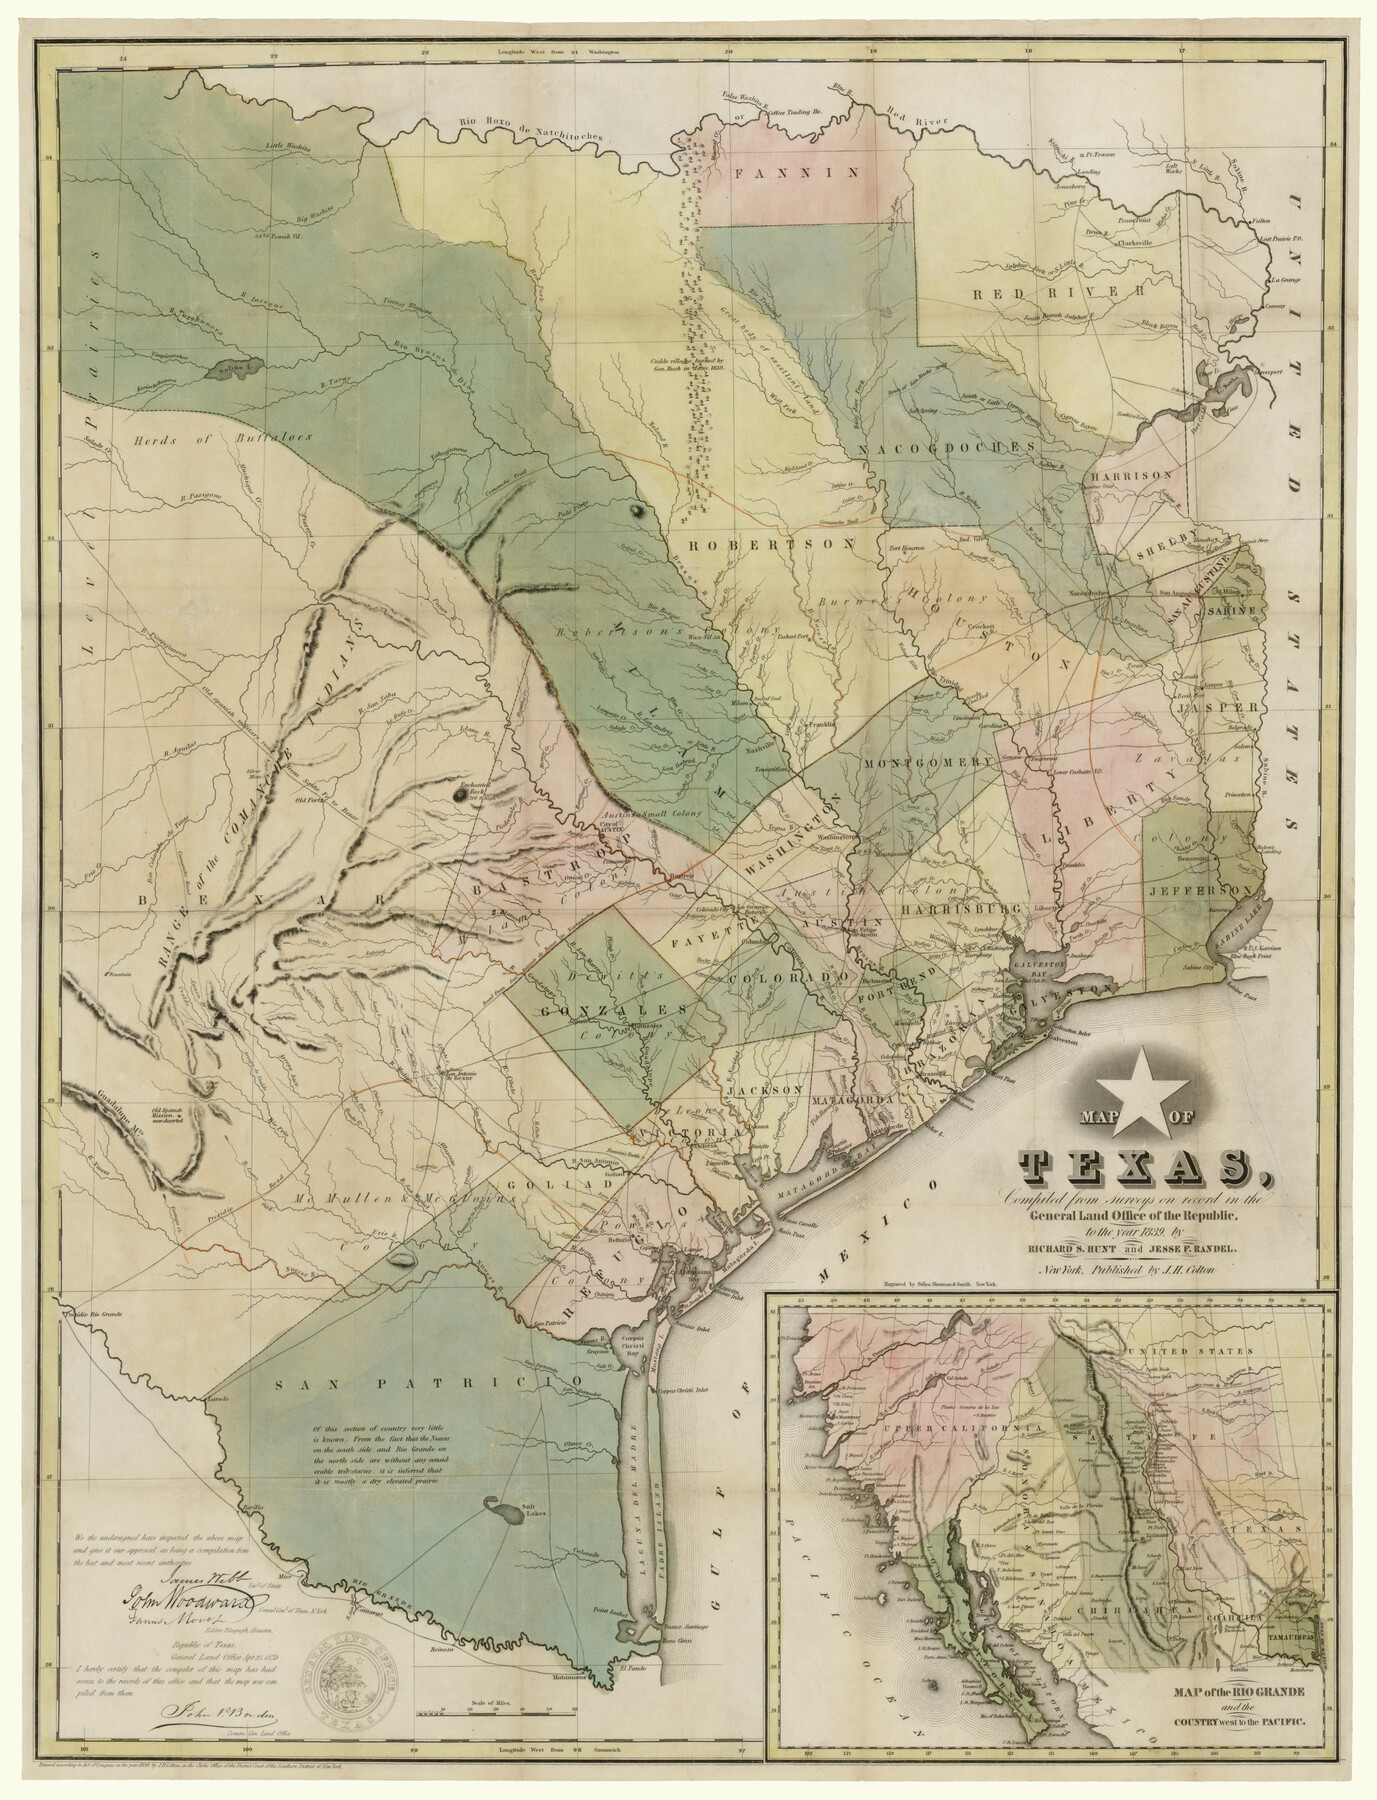 93858, Map of Texas, compiled from surveys on record in the General Land Office of the Republic, Holcomb Digital Map Collection